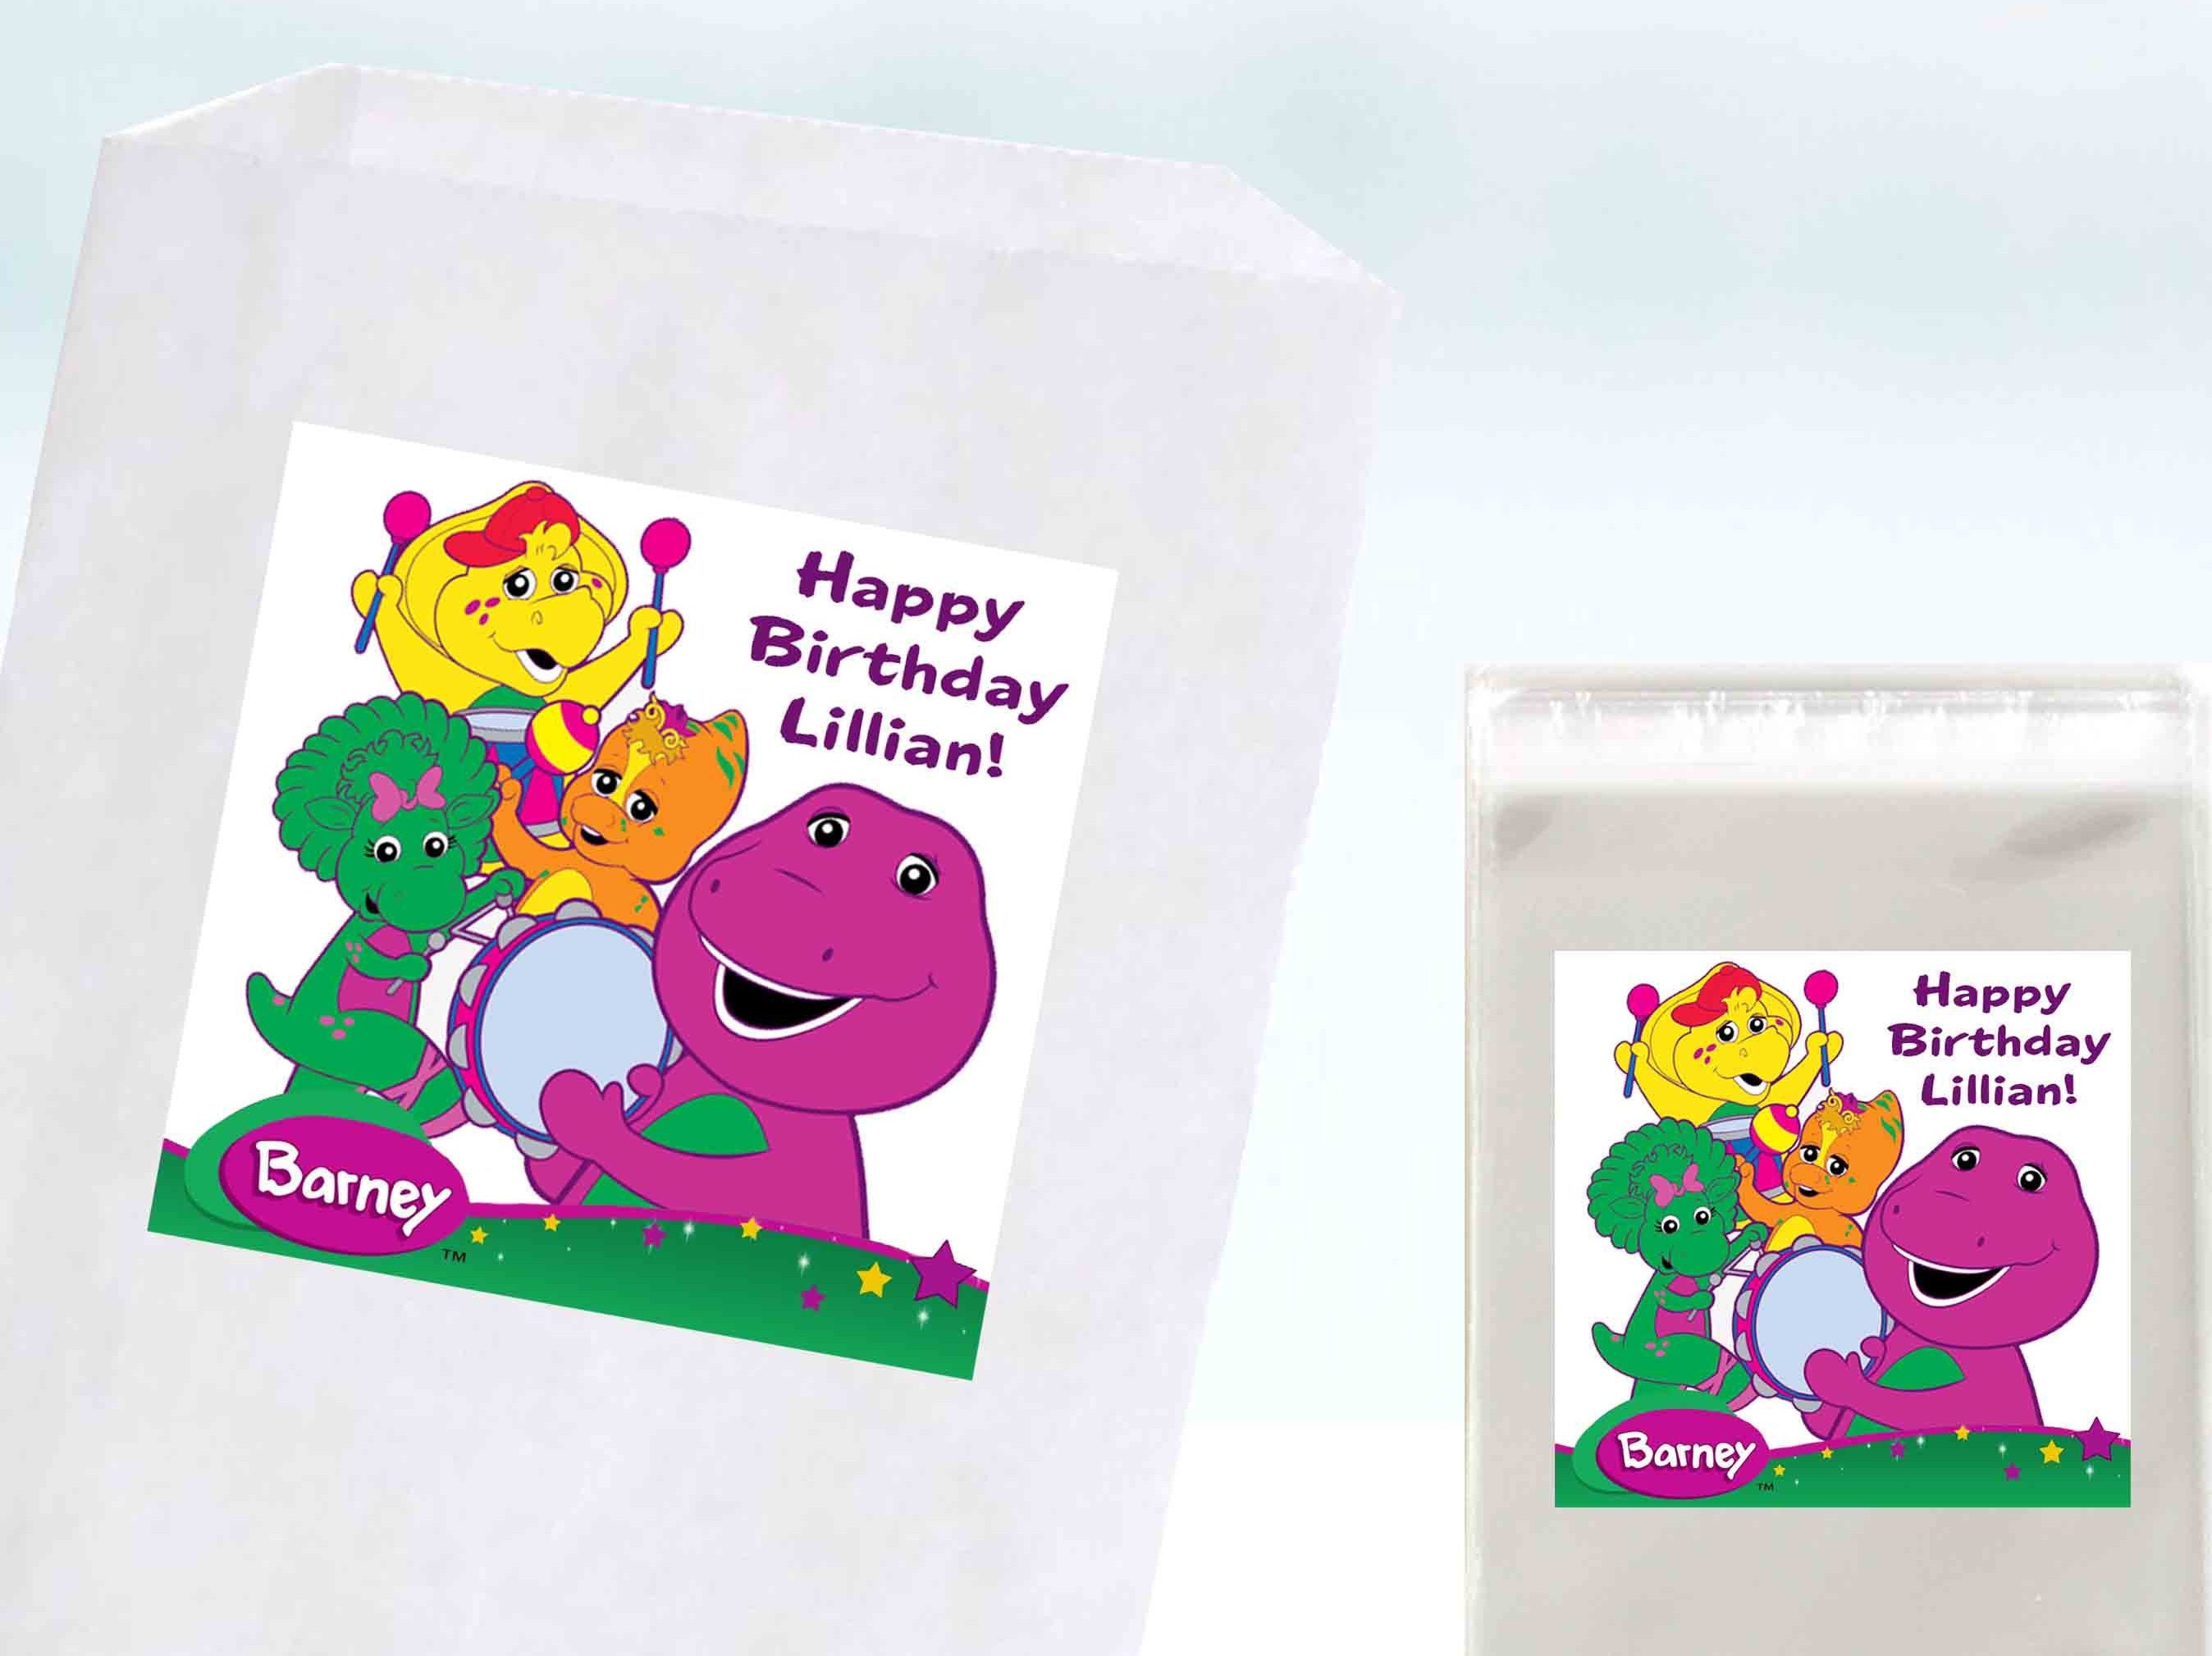 Assorted Party Favors 25 Backyardigans Stickers 2.5" x 2.5" each